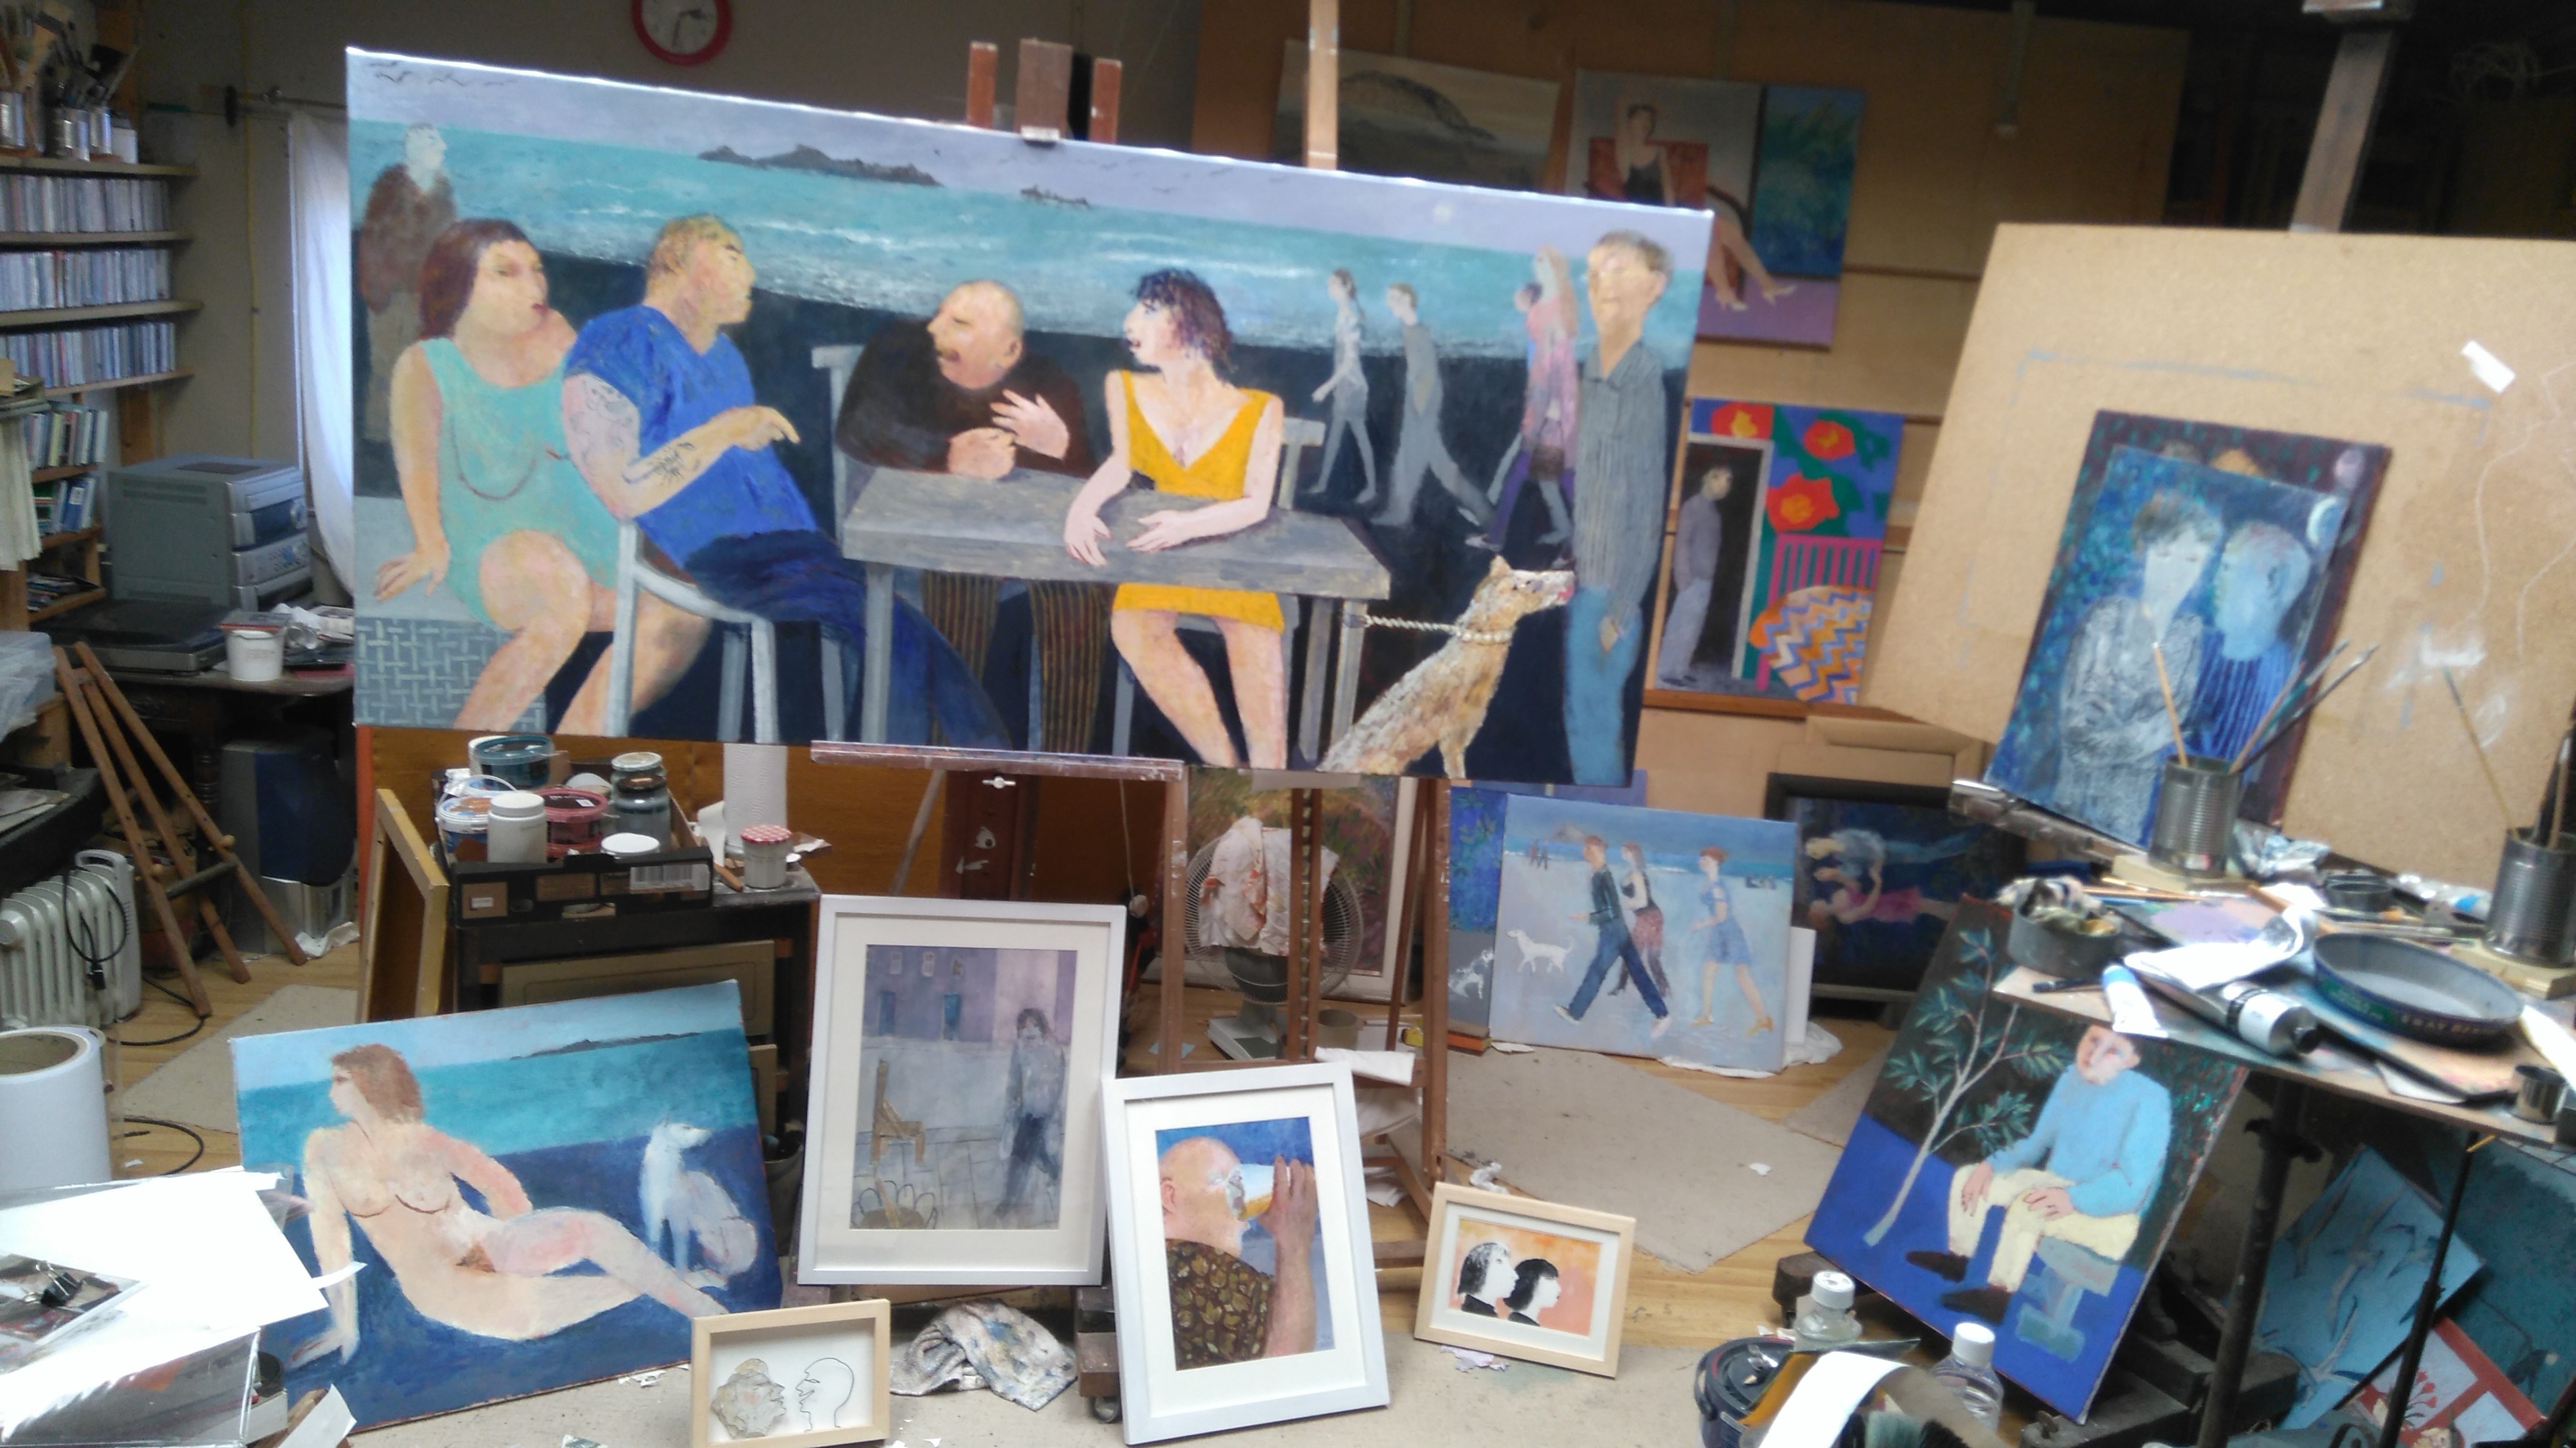 Photograph of Richard Sorrell's work for BREXhibITion in his Penzance studio